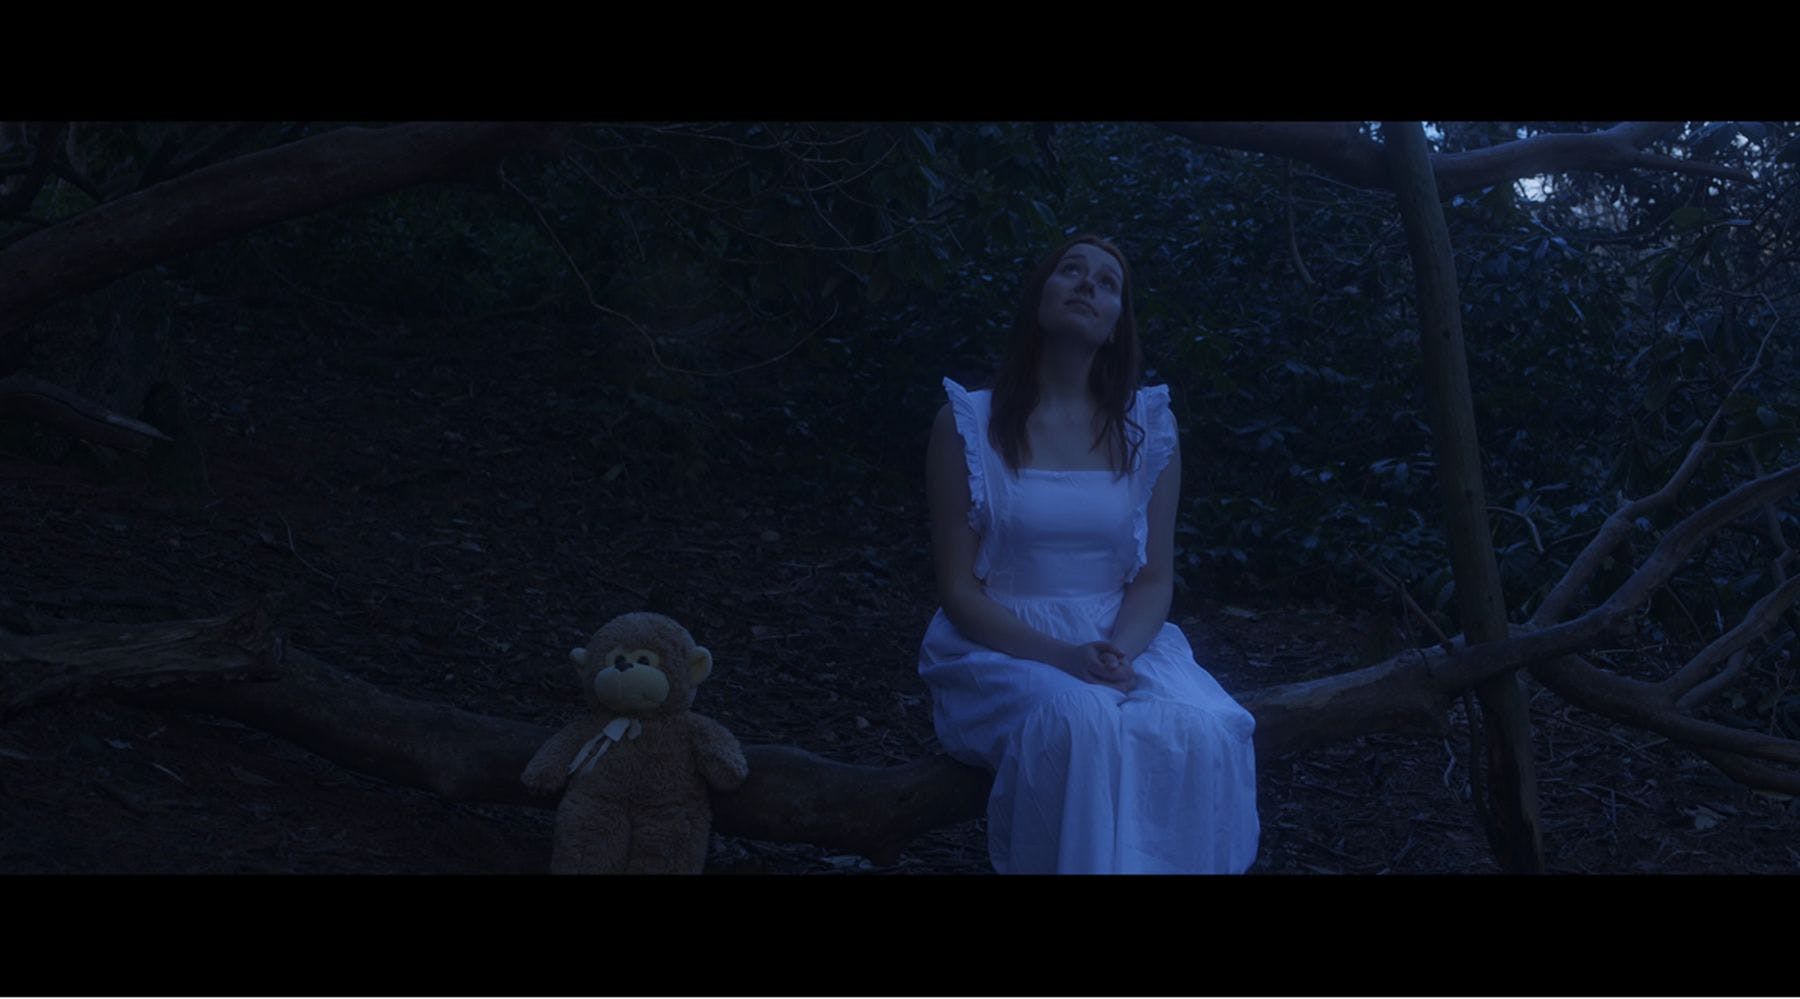 Film still from 'Otherhood' by Maria Bors